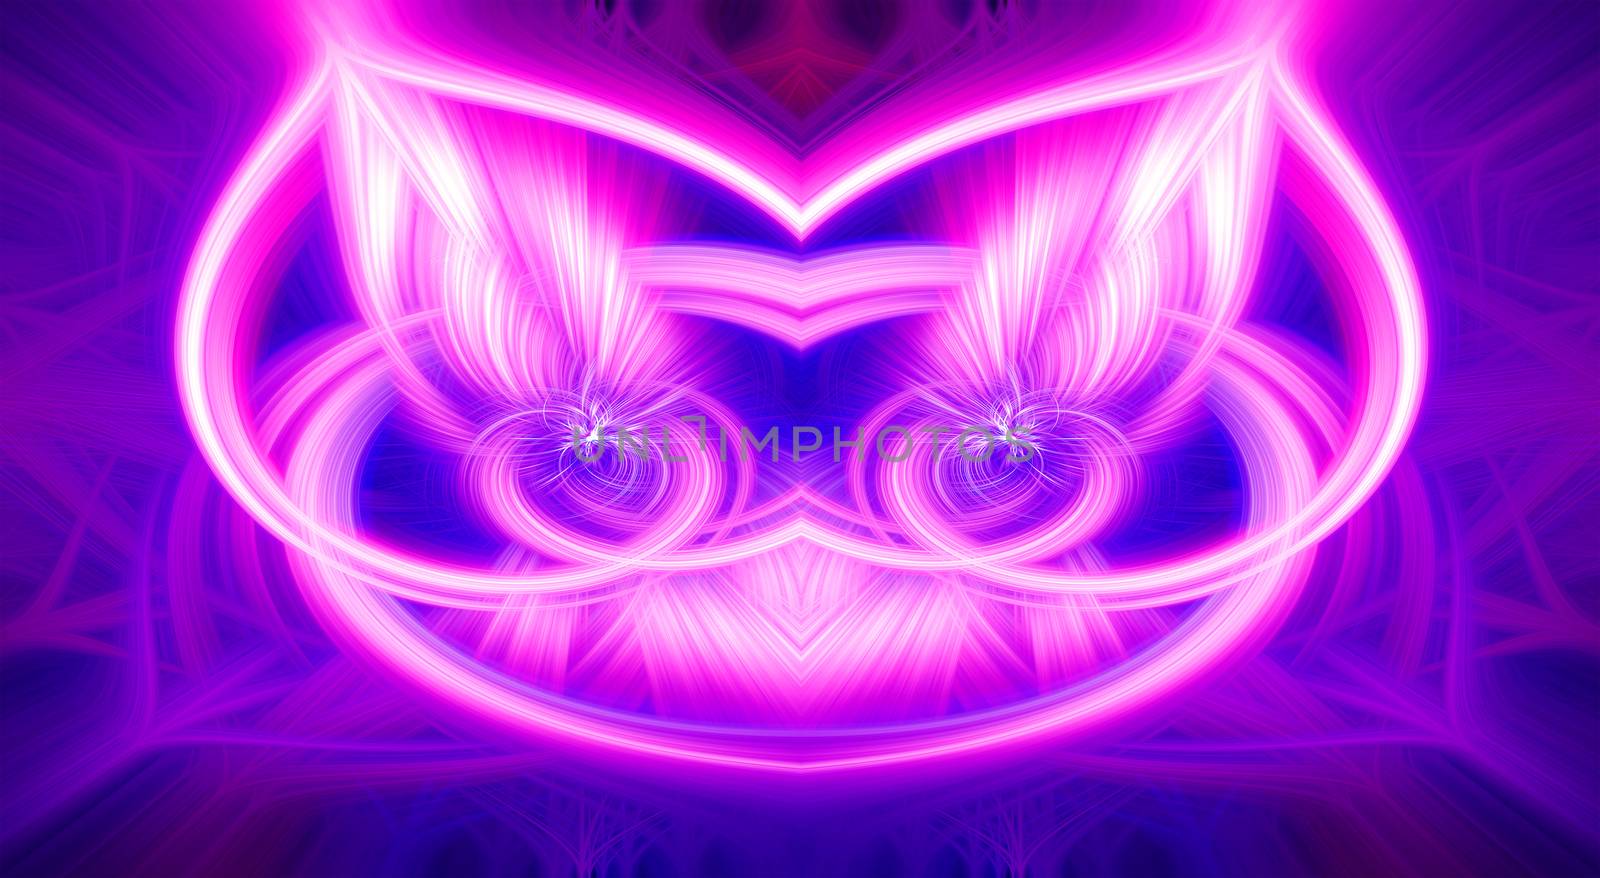 Beautiful abstract intertwined glowing 3d fibers forming a shape of sparkle, flame, flower, interlinked hearts and cat looking creature. Blue, maroon, pink, and purple colors. Illustration by DamantisZ